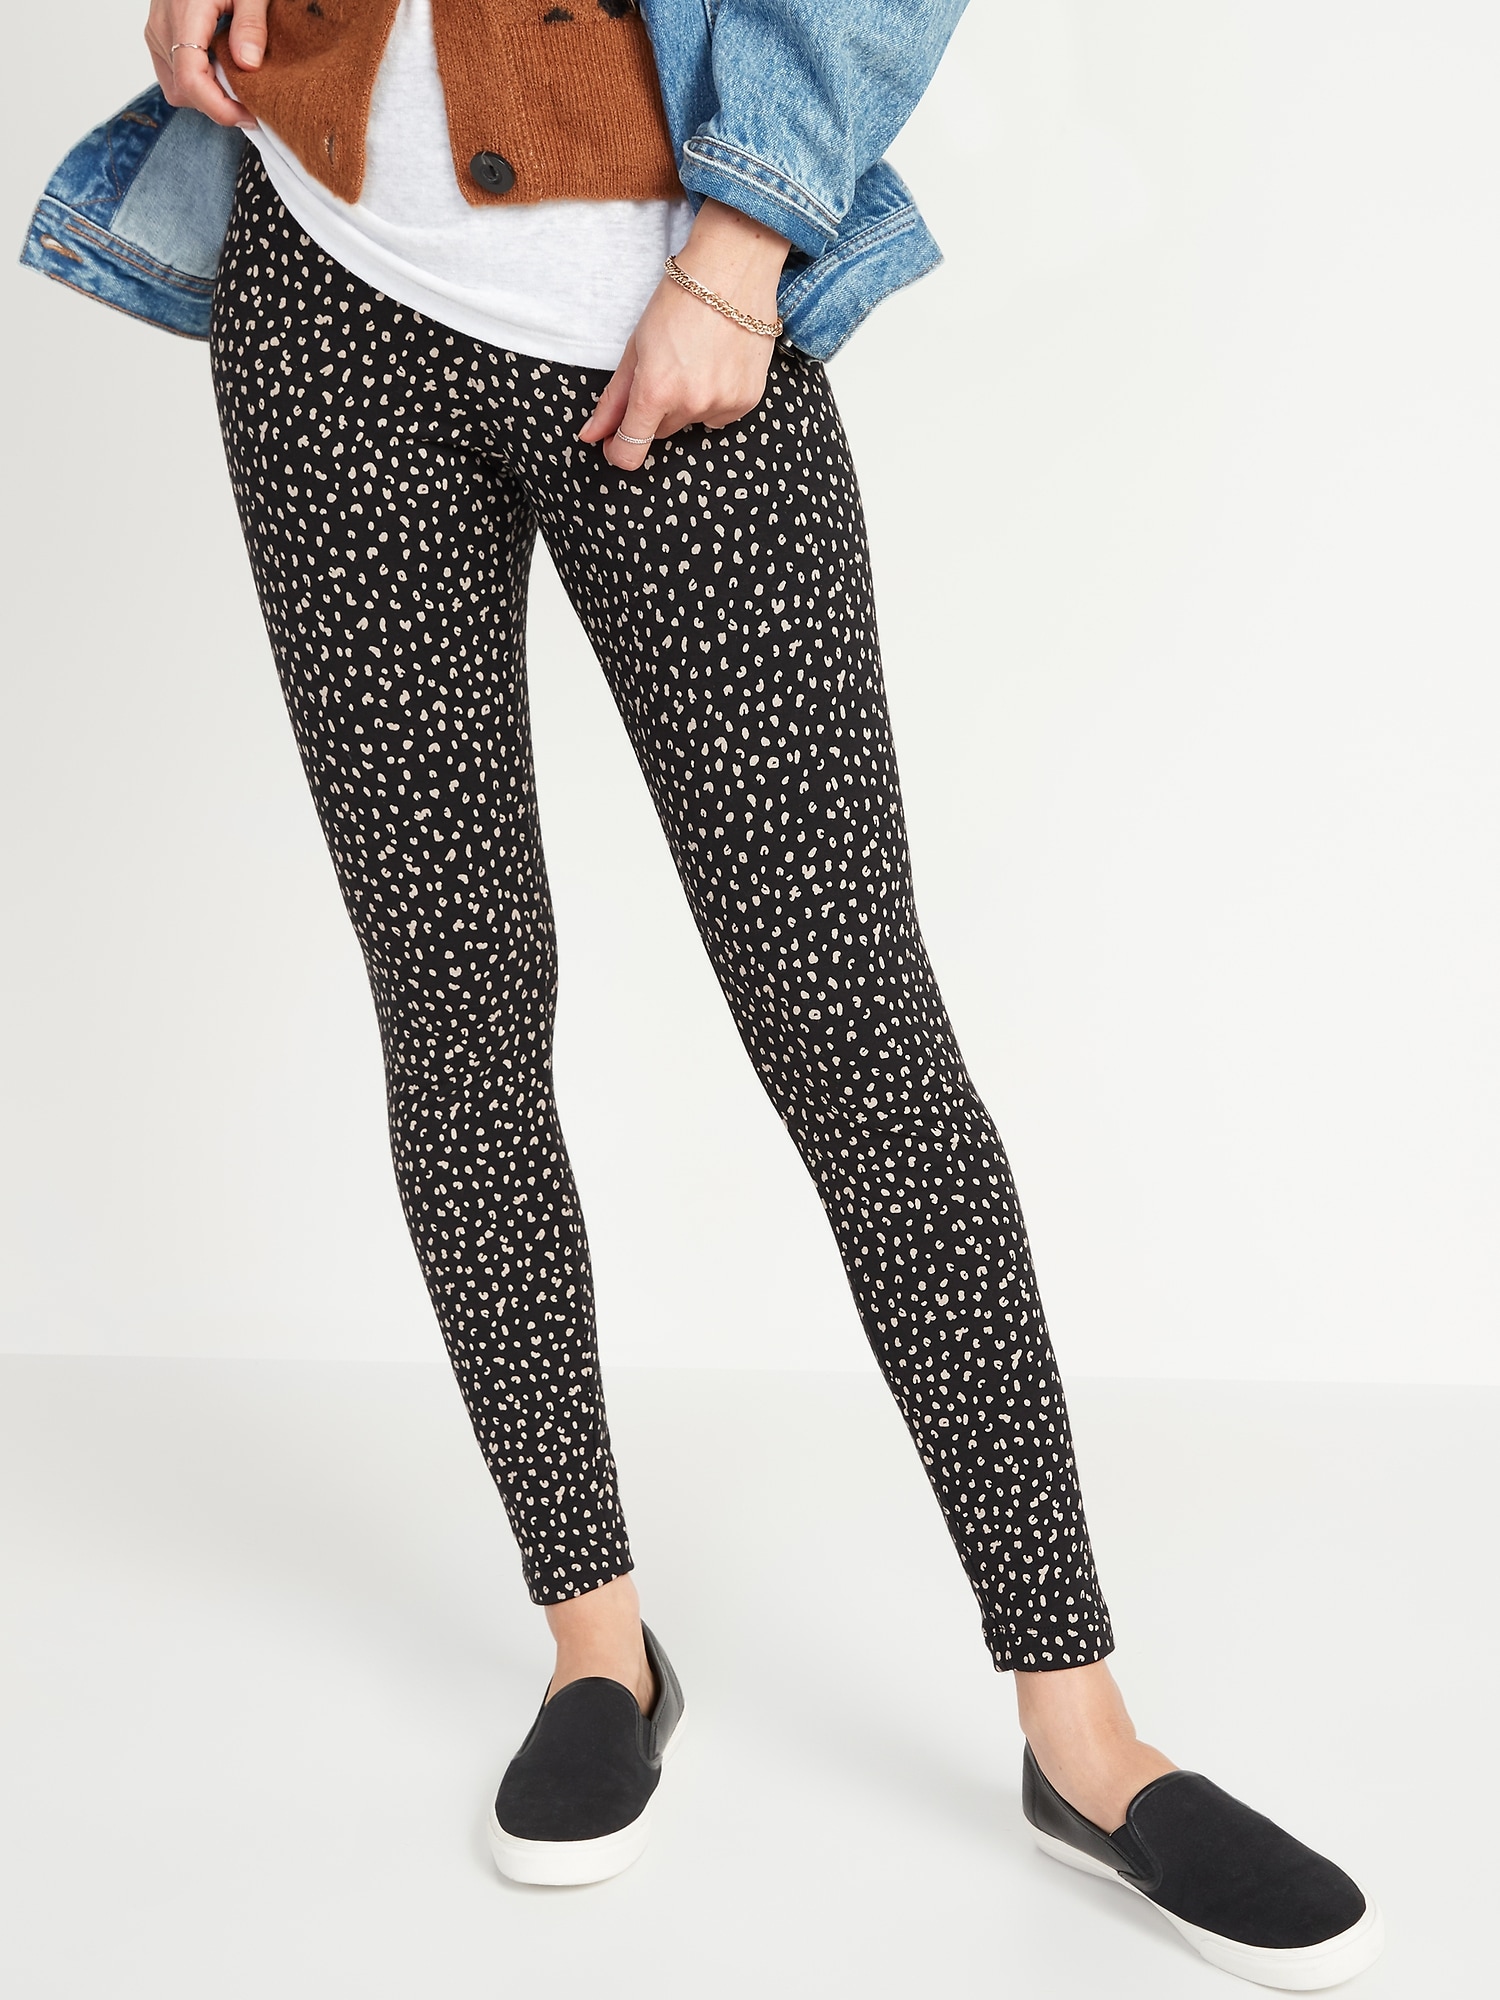 High-Waisted Cozy-Lined Cheetah Print Leggings for Women | Old Navy